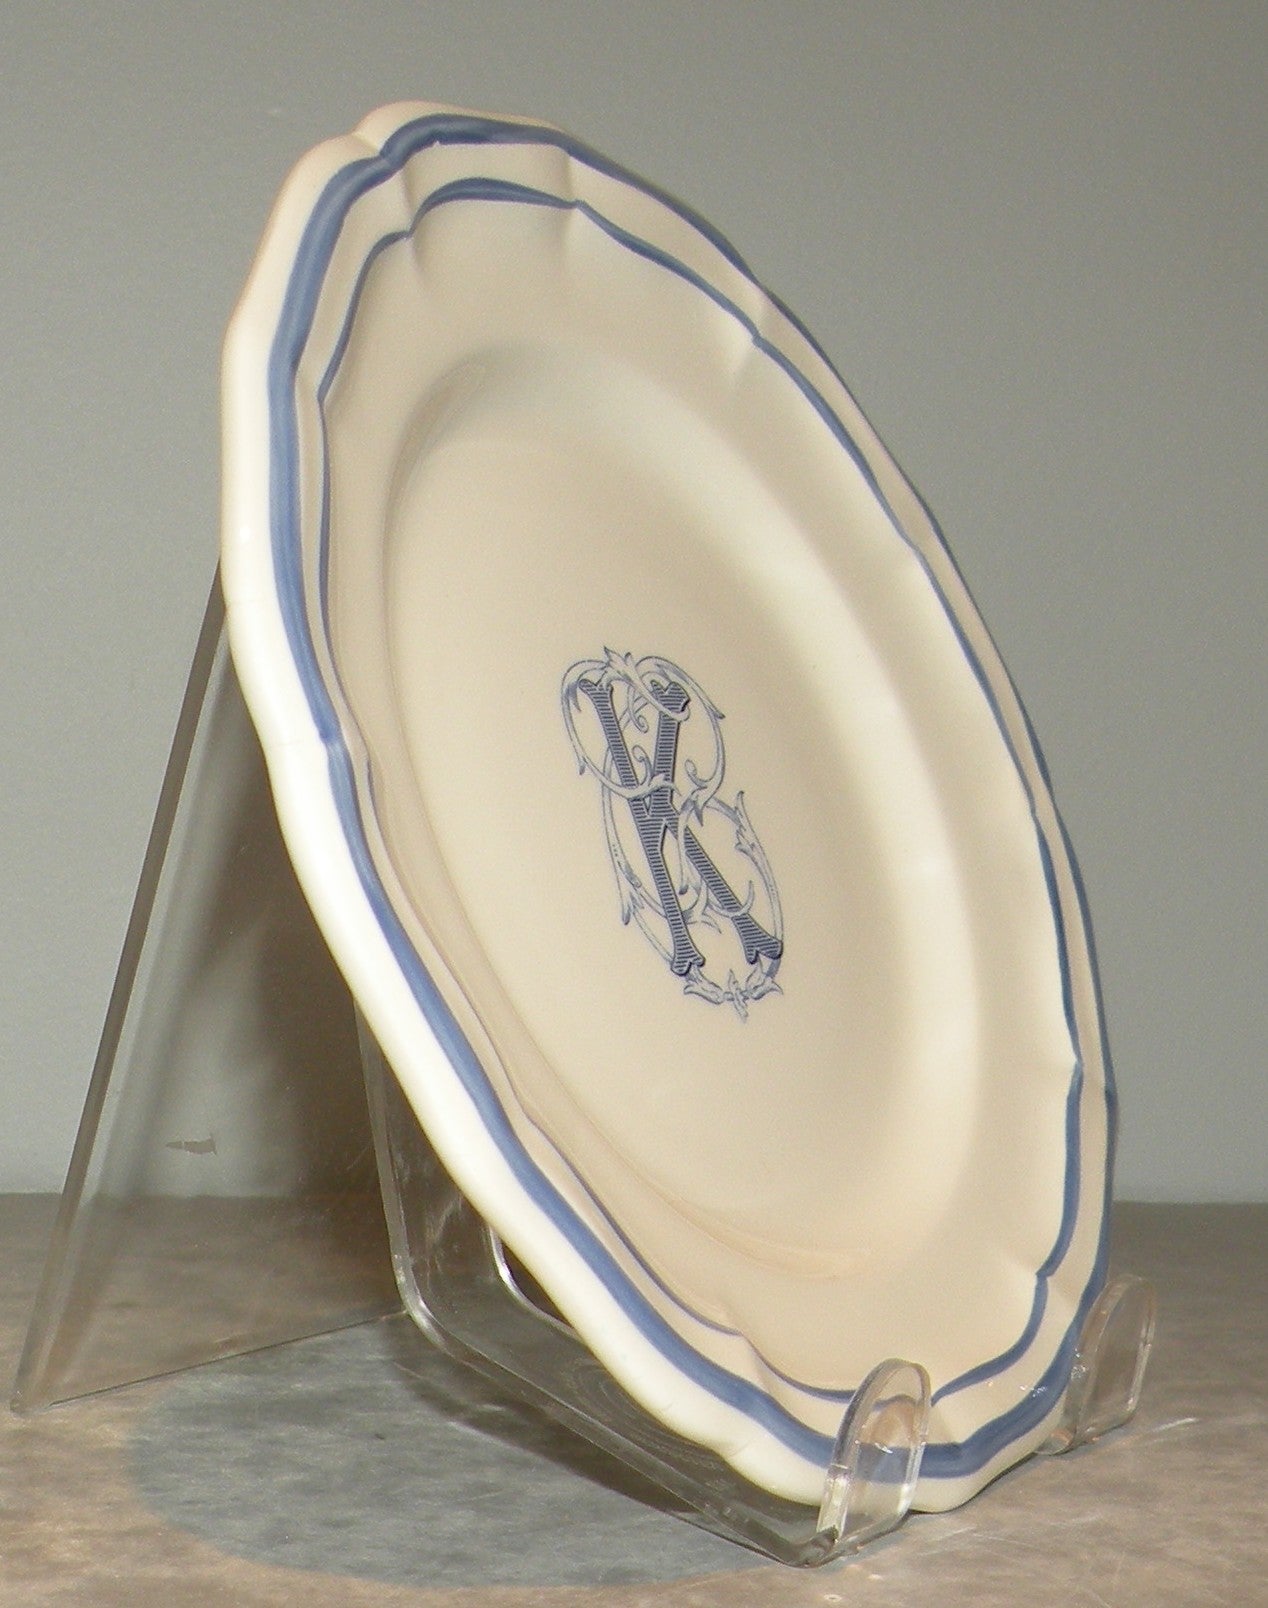 Bread & Butter Plate with the letter K , Filet Bleu Monogramme